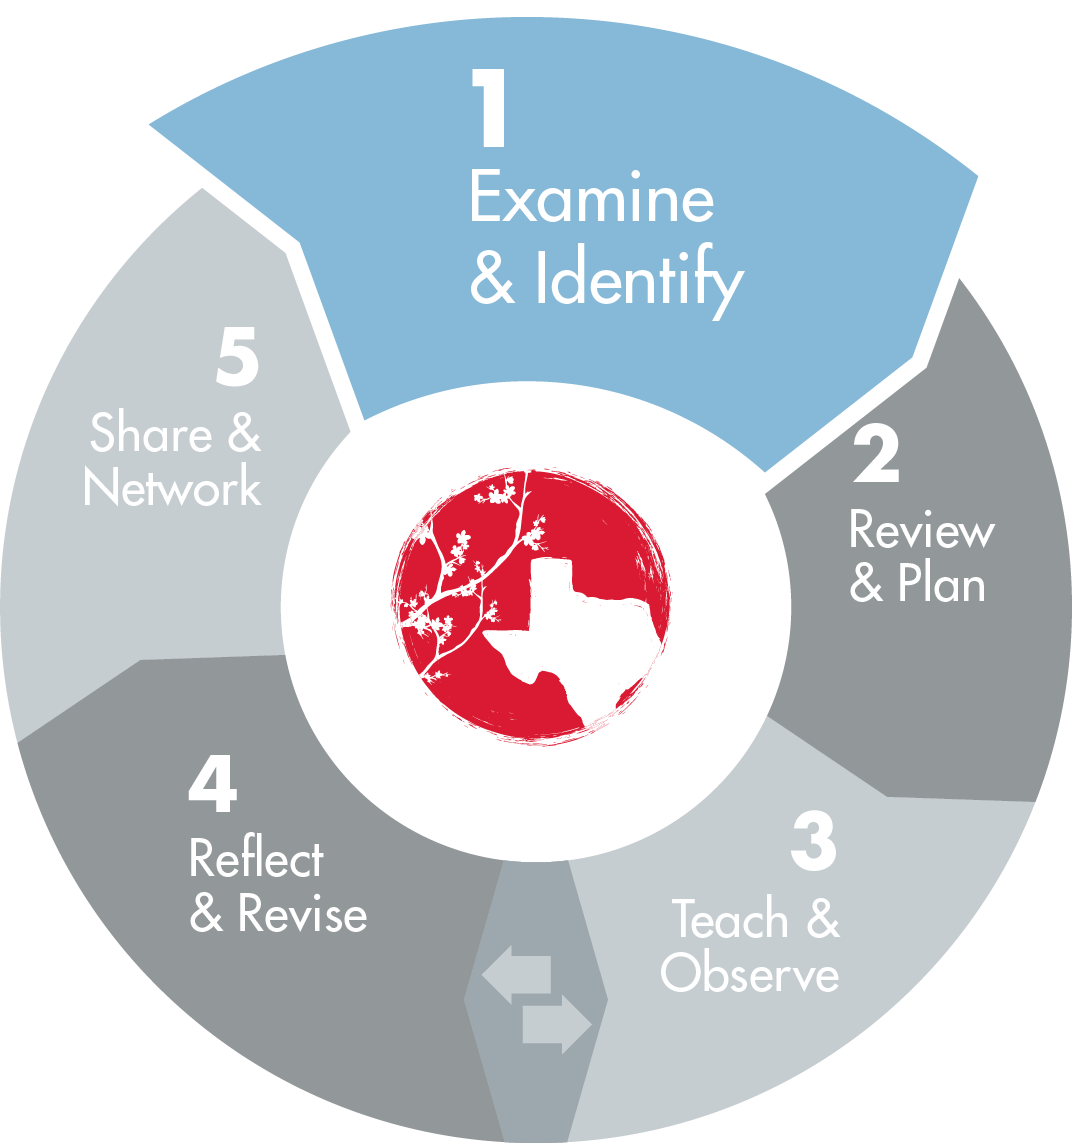 TEXAS LESSON STUDY  5 PHASES - 1. Examine & Identify, 2. Review & Plan, 3. Teach & Observe, 4. Reflect & Revise and 5. Share & Network,  where phase 1 is visually selected